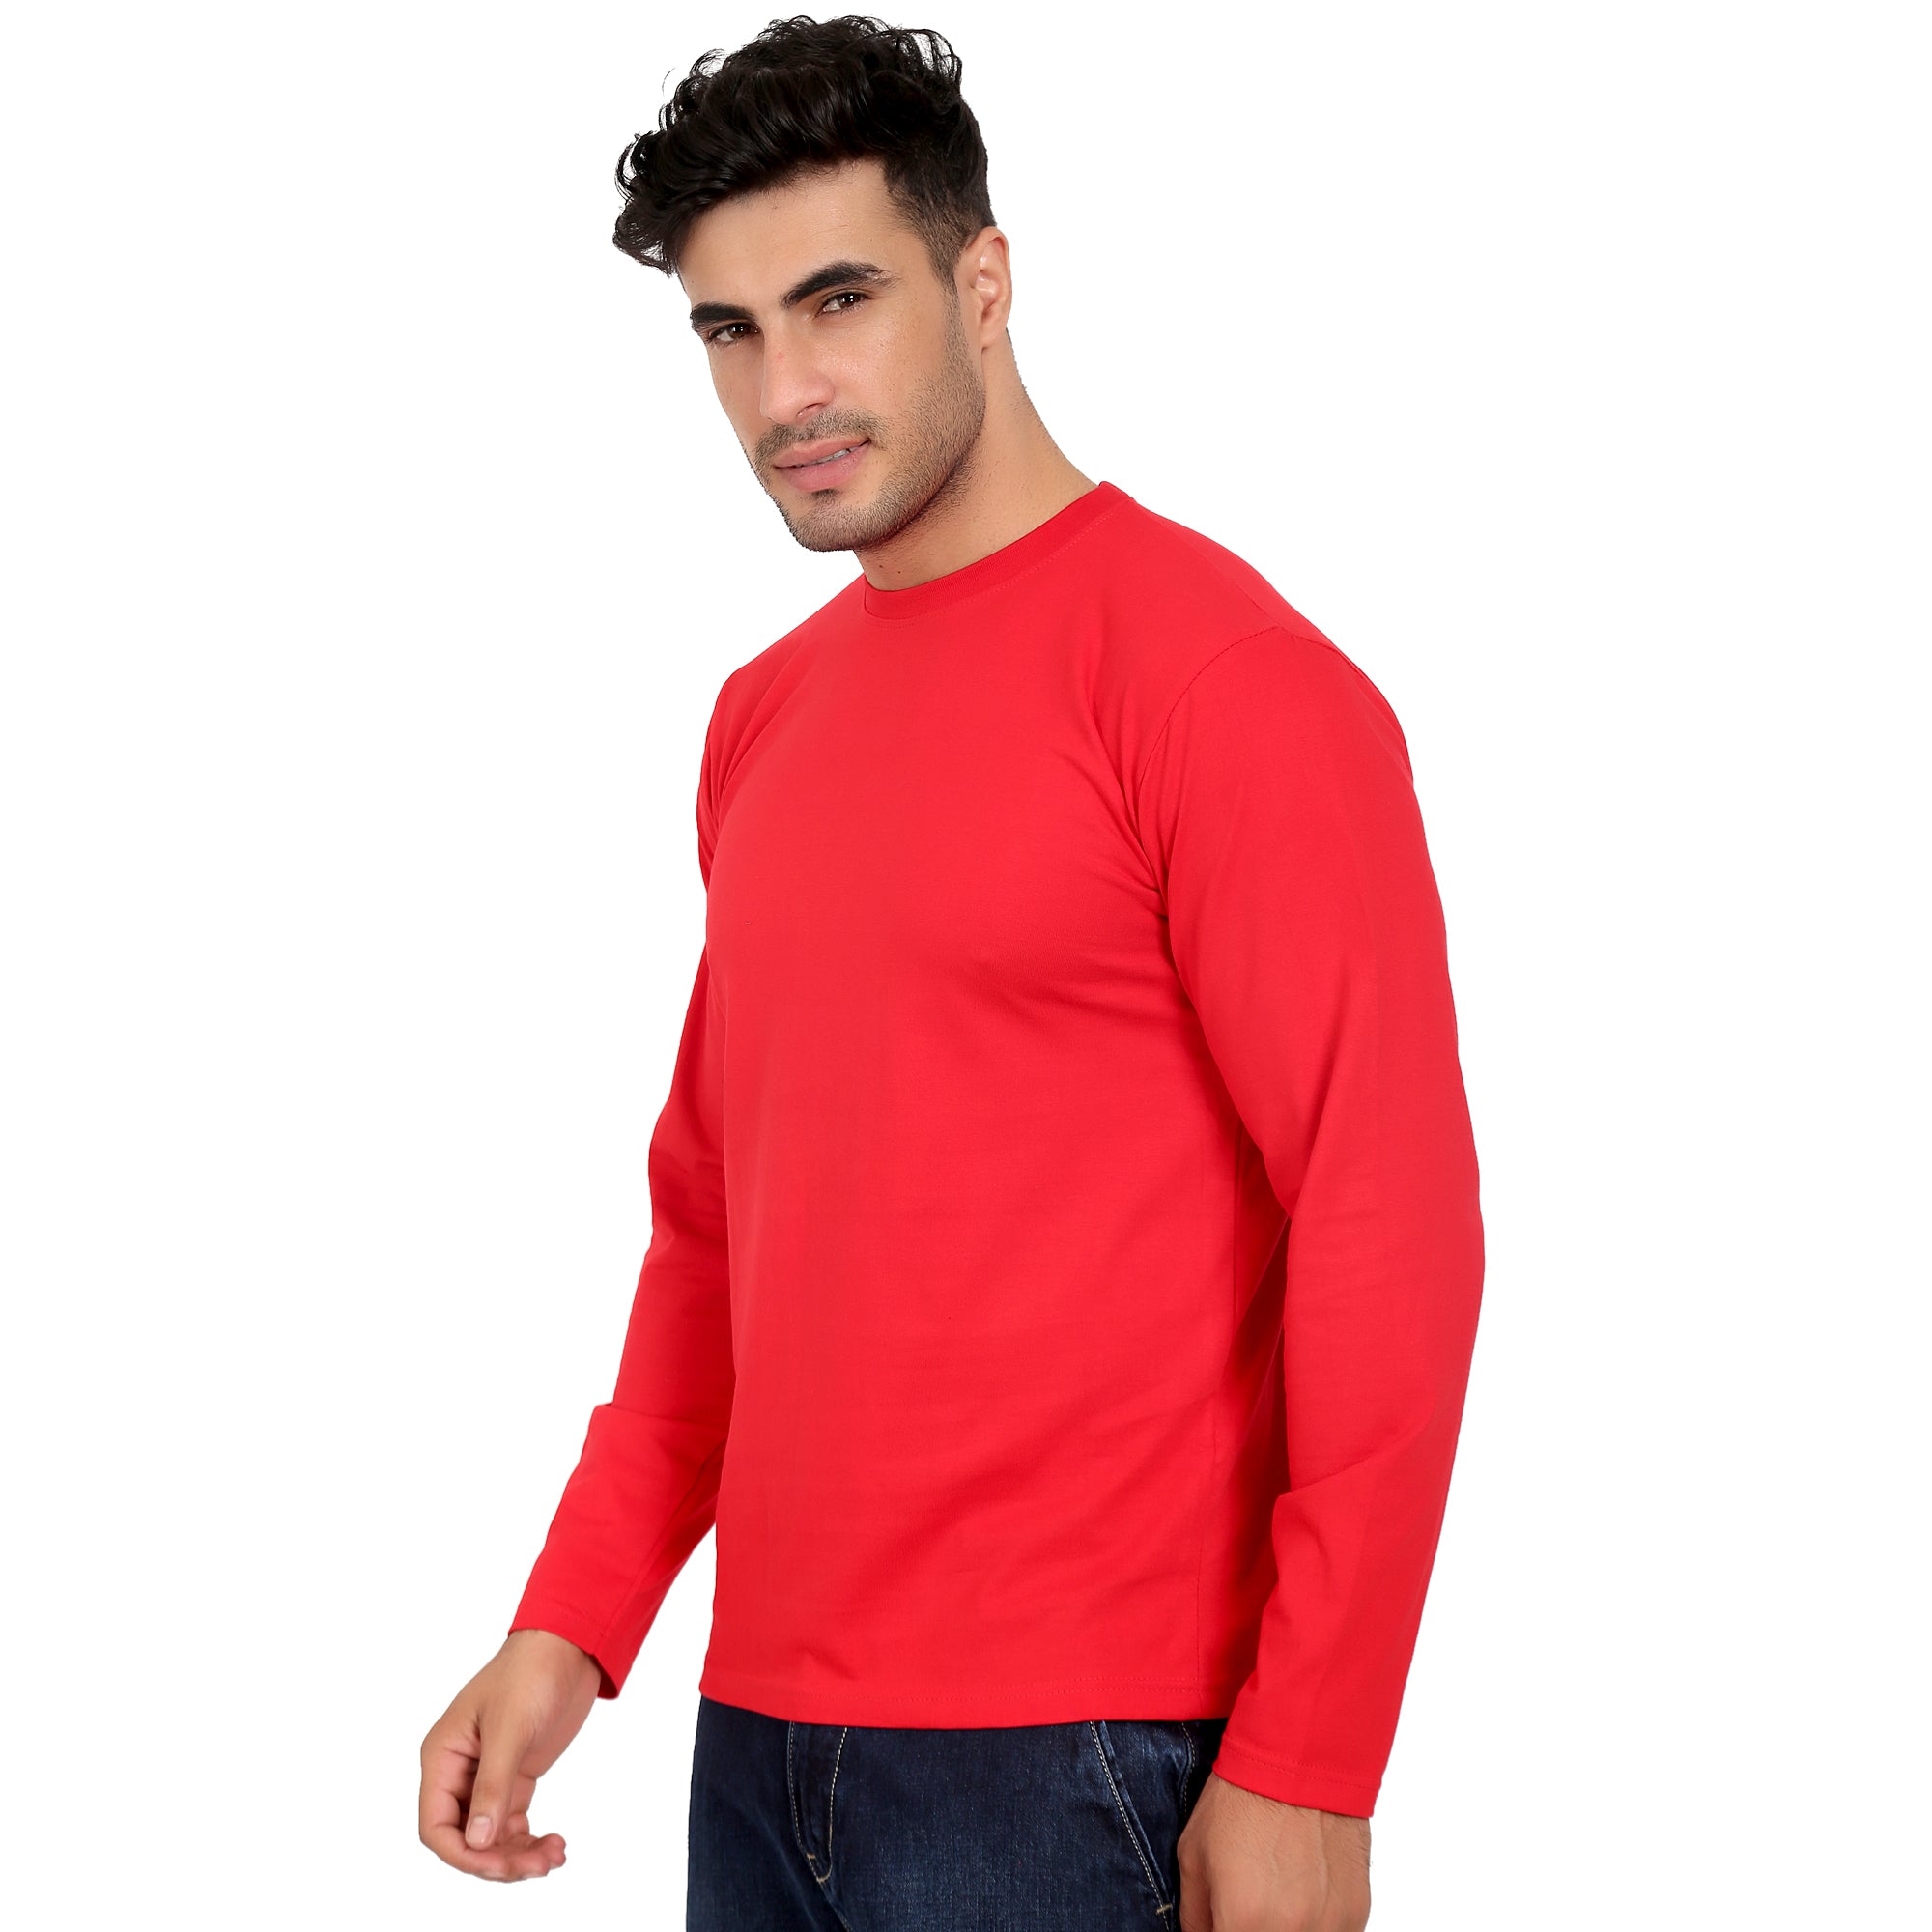 Men Crew Neck Cotton T-Shirts - Full Sleeves, Red Colour